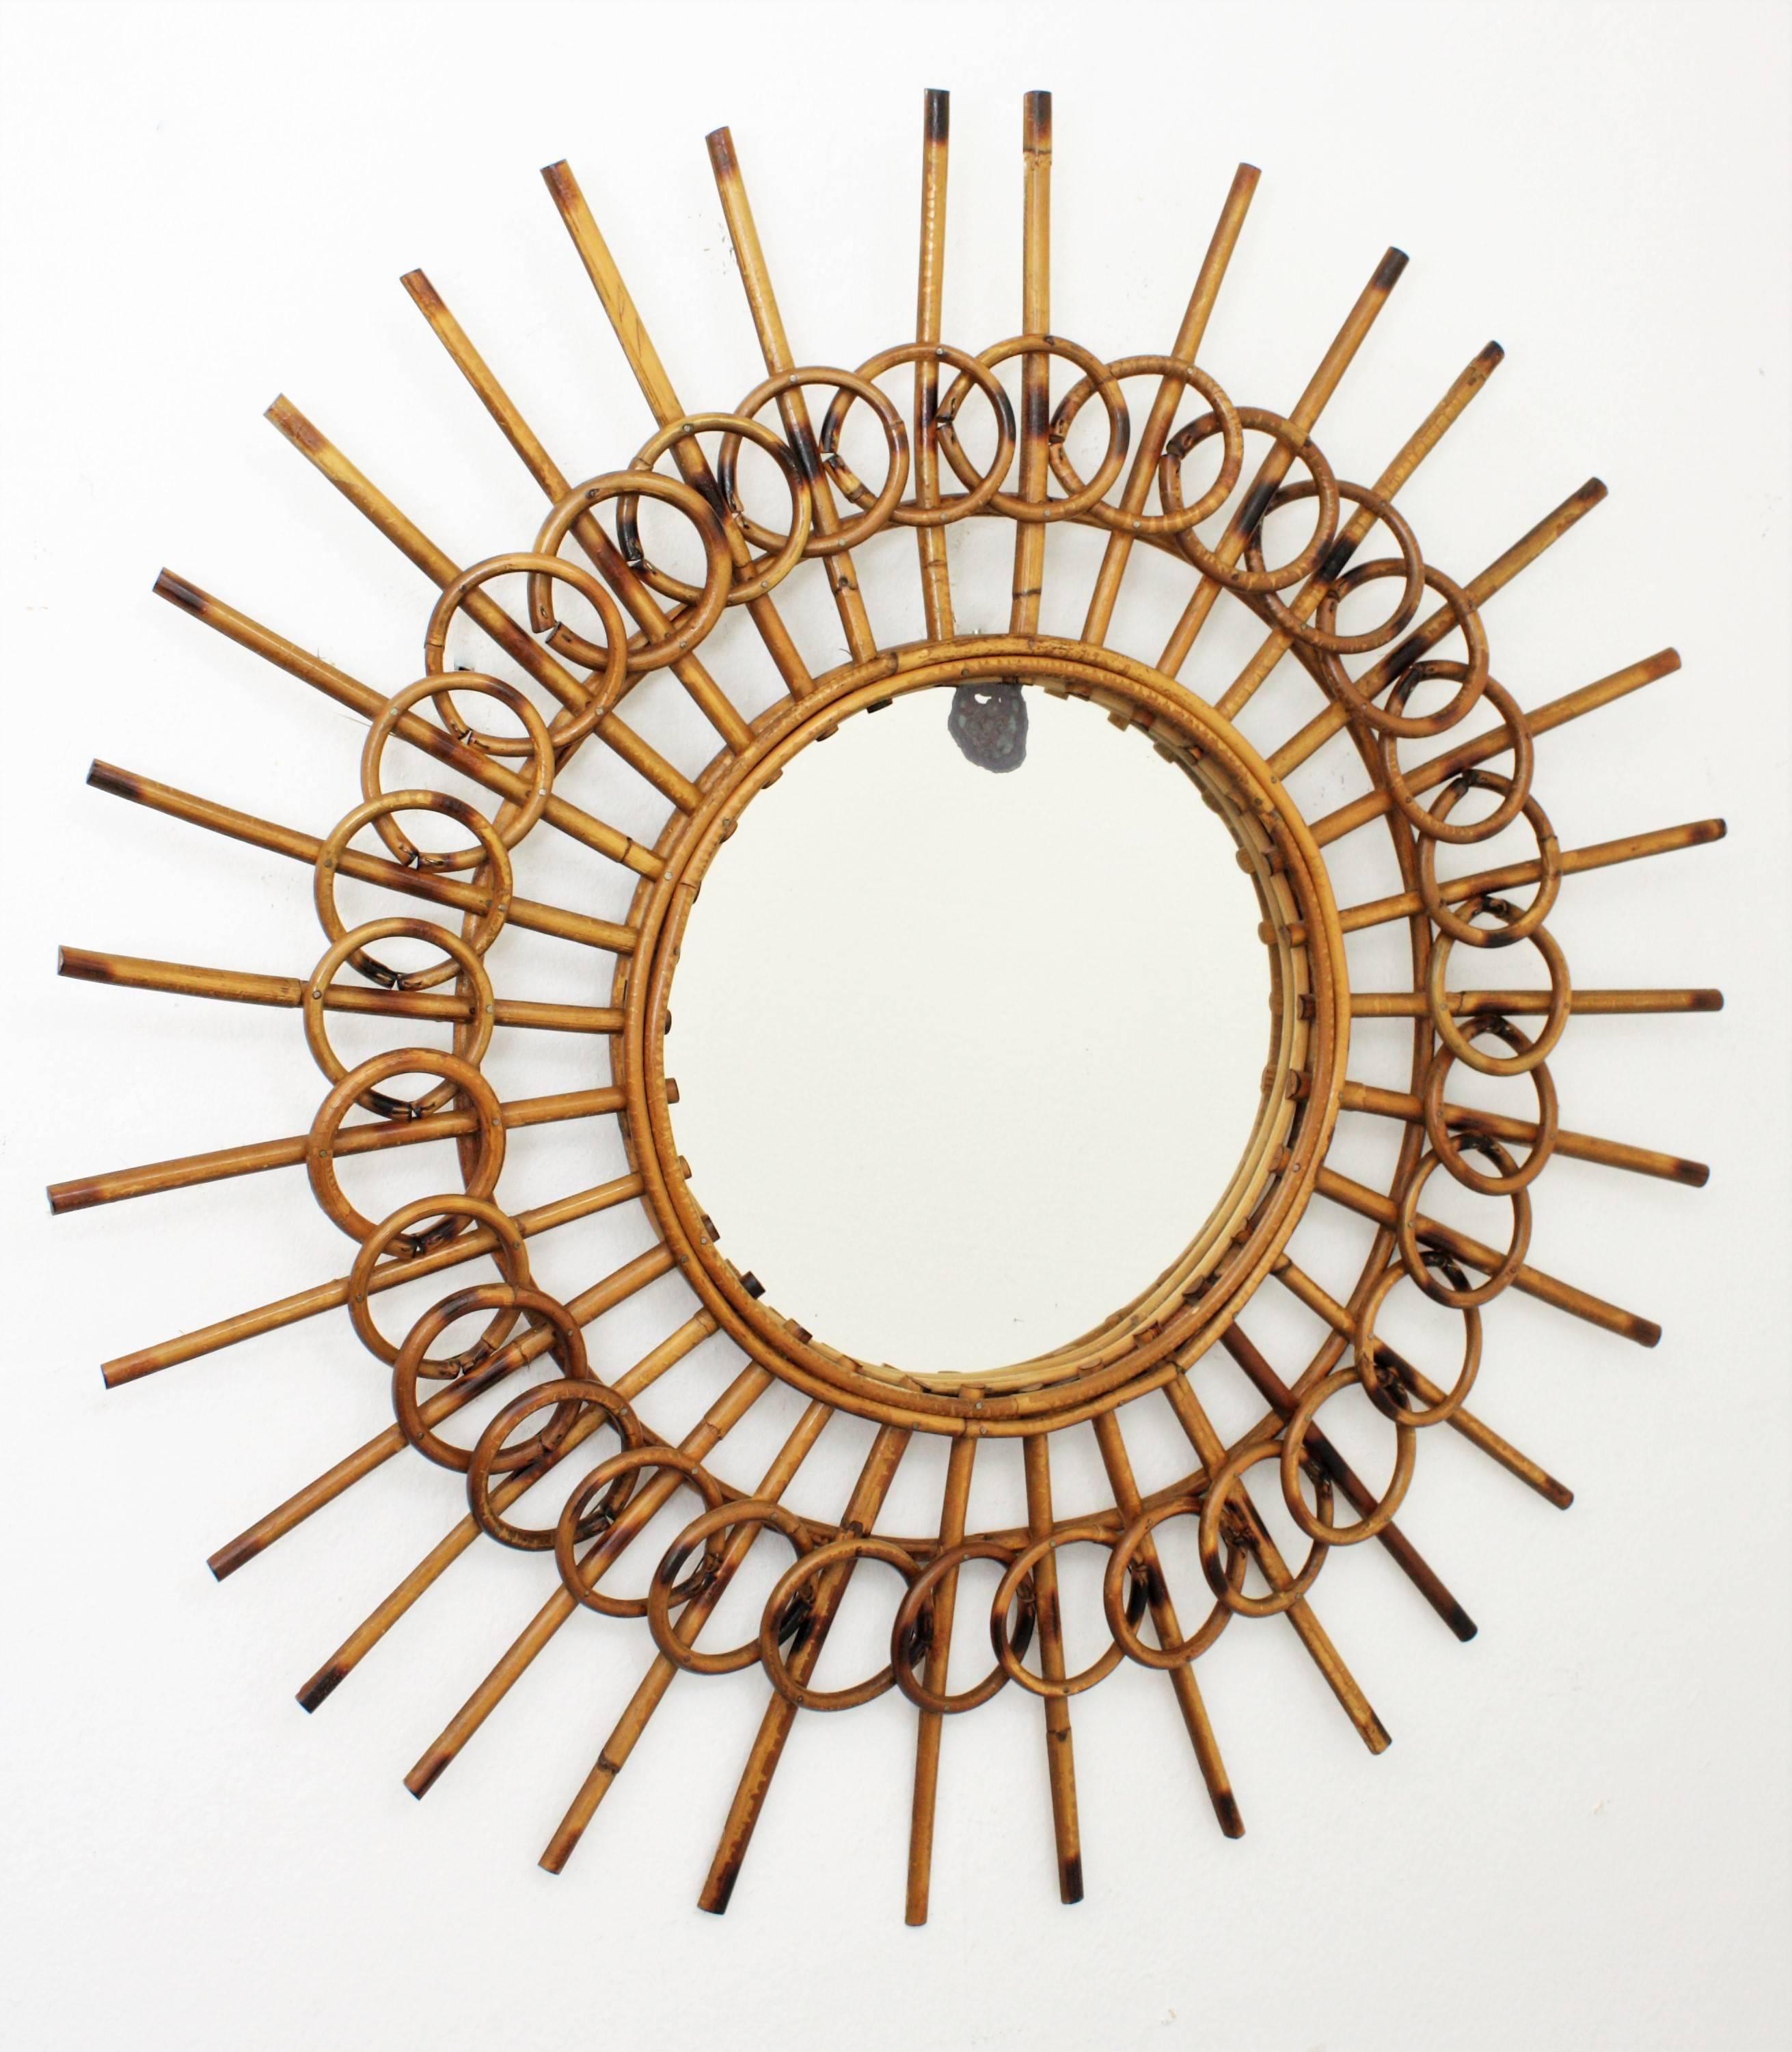 A highly decorative rattan sunburst mirror framed by circles with a lovely color.
This mirror has the French Riviera Mediterranean taste with an unusual handcrafted beautiful work.
Lovely to place it alone or in a wall decoration with other